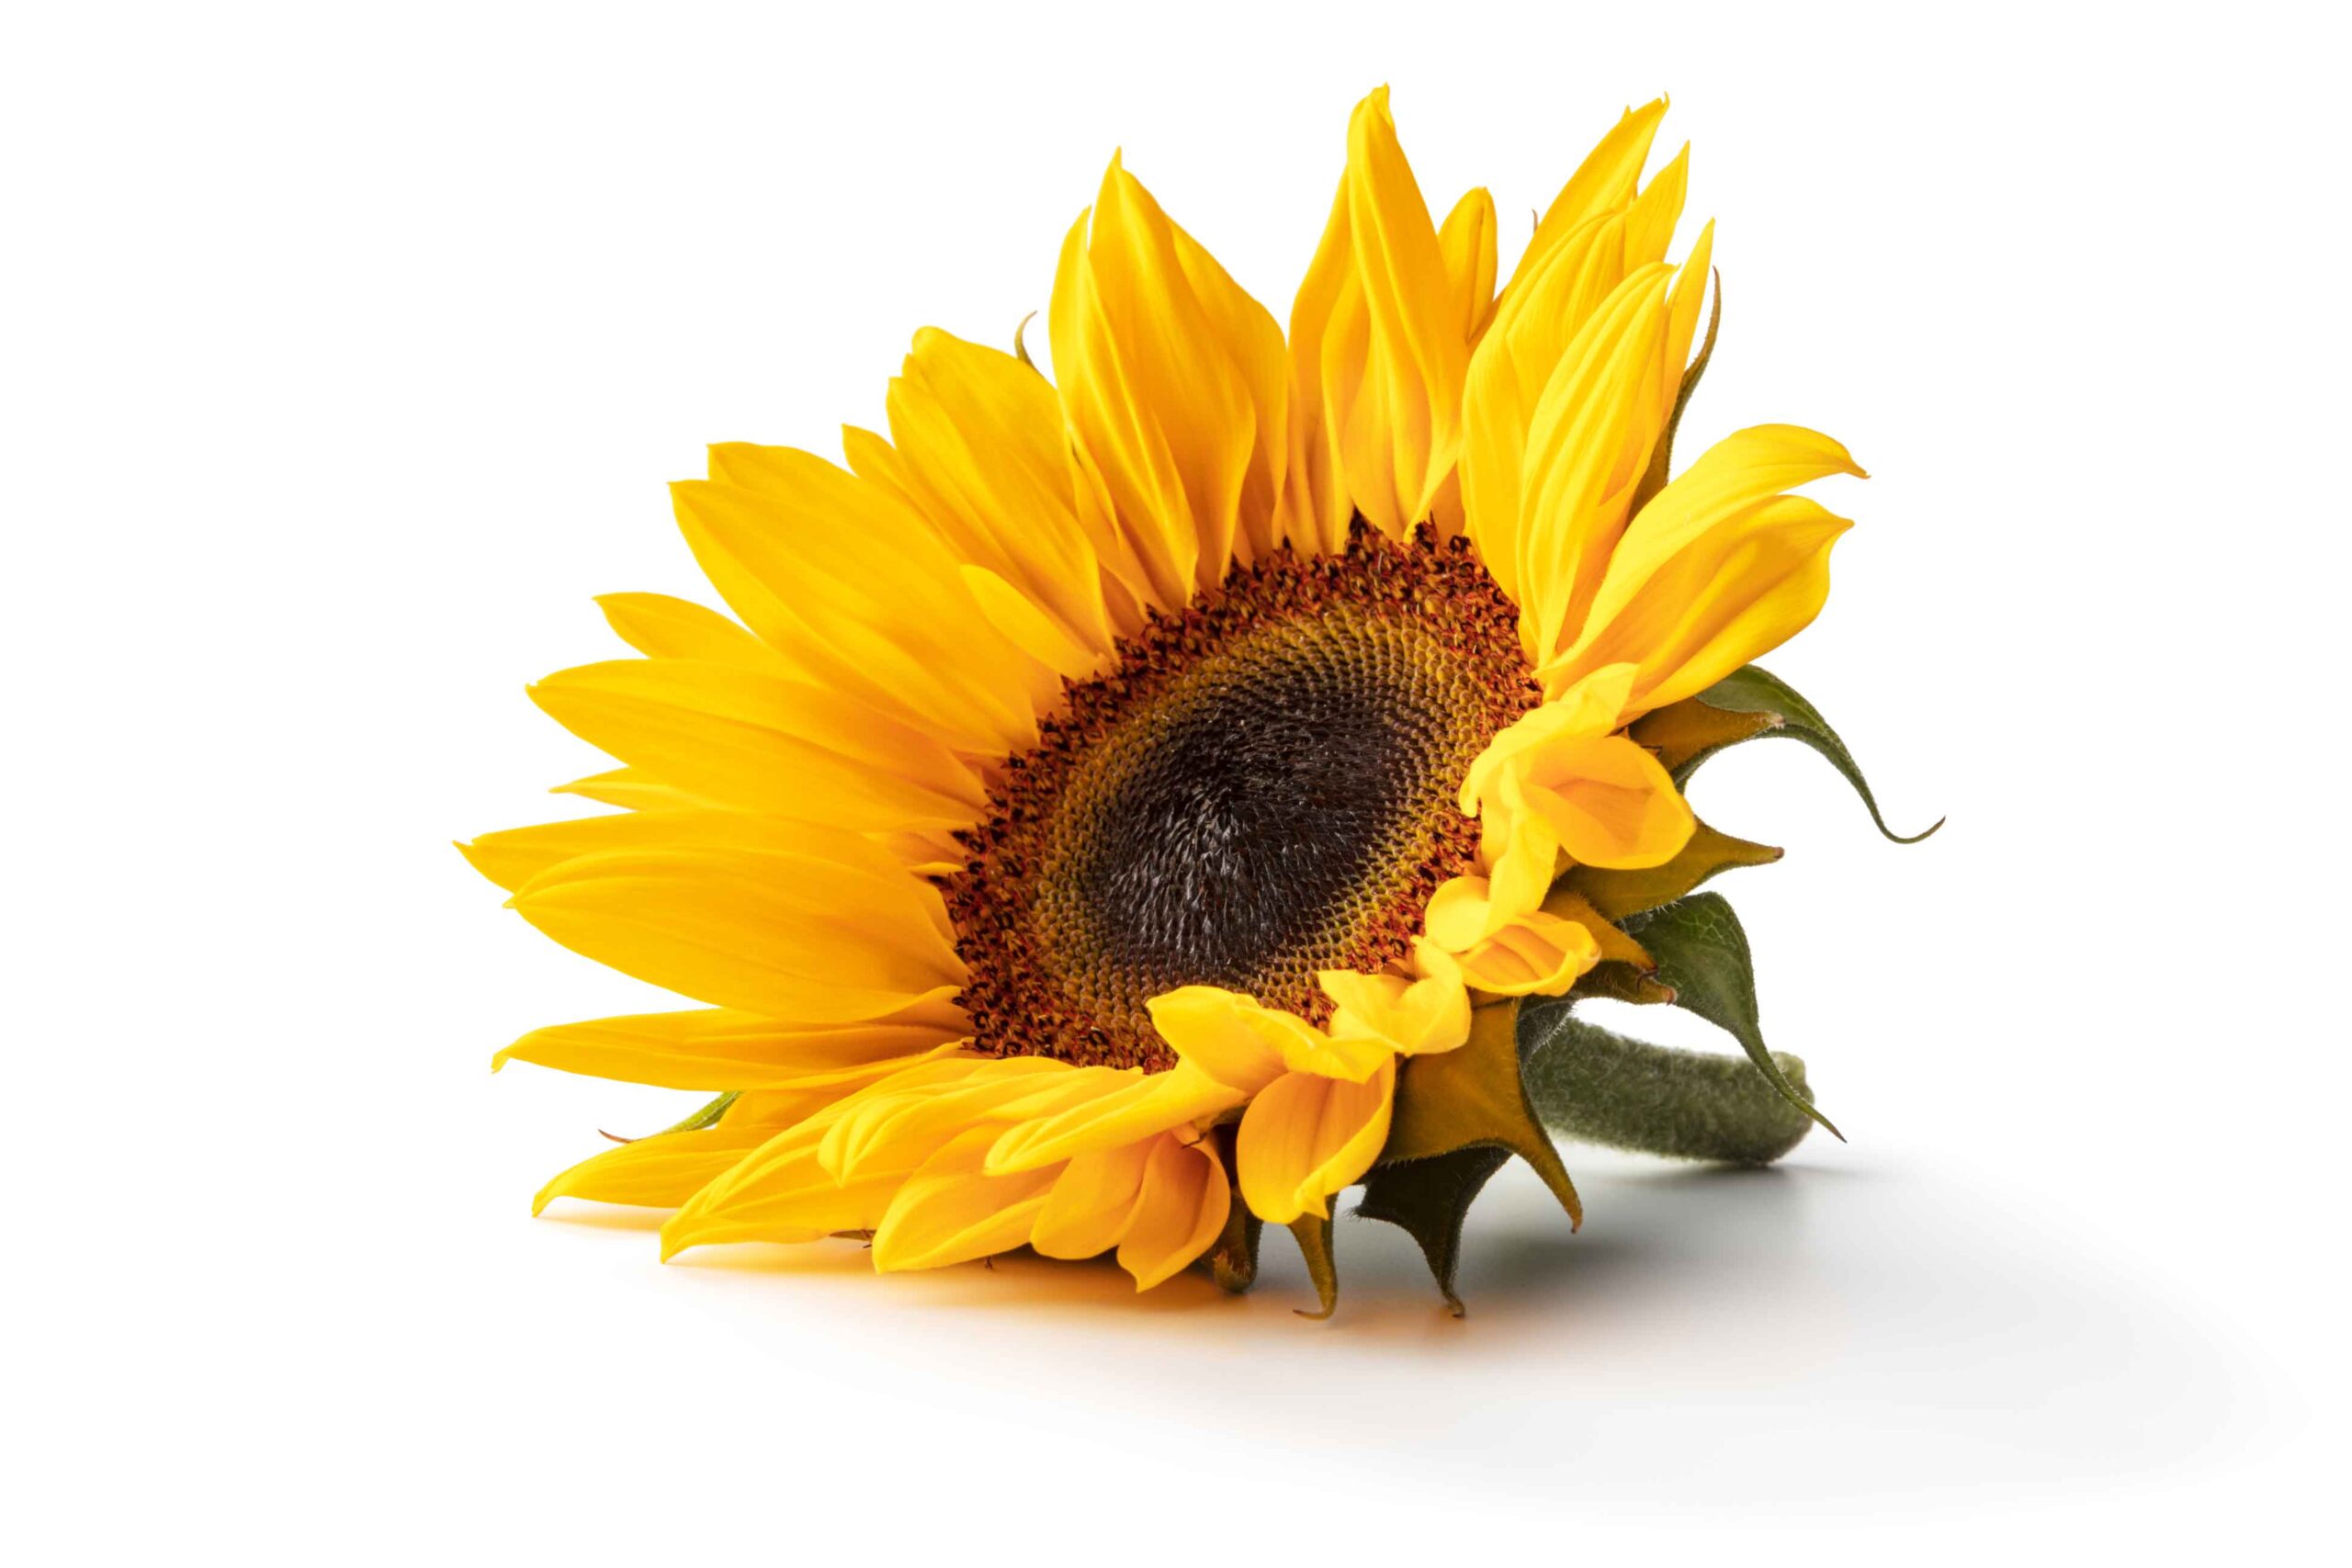 One Sunflower laying on its side with a white background.